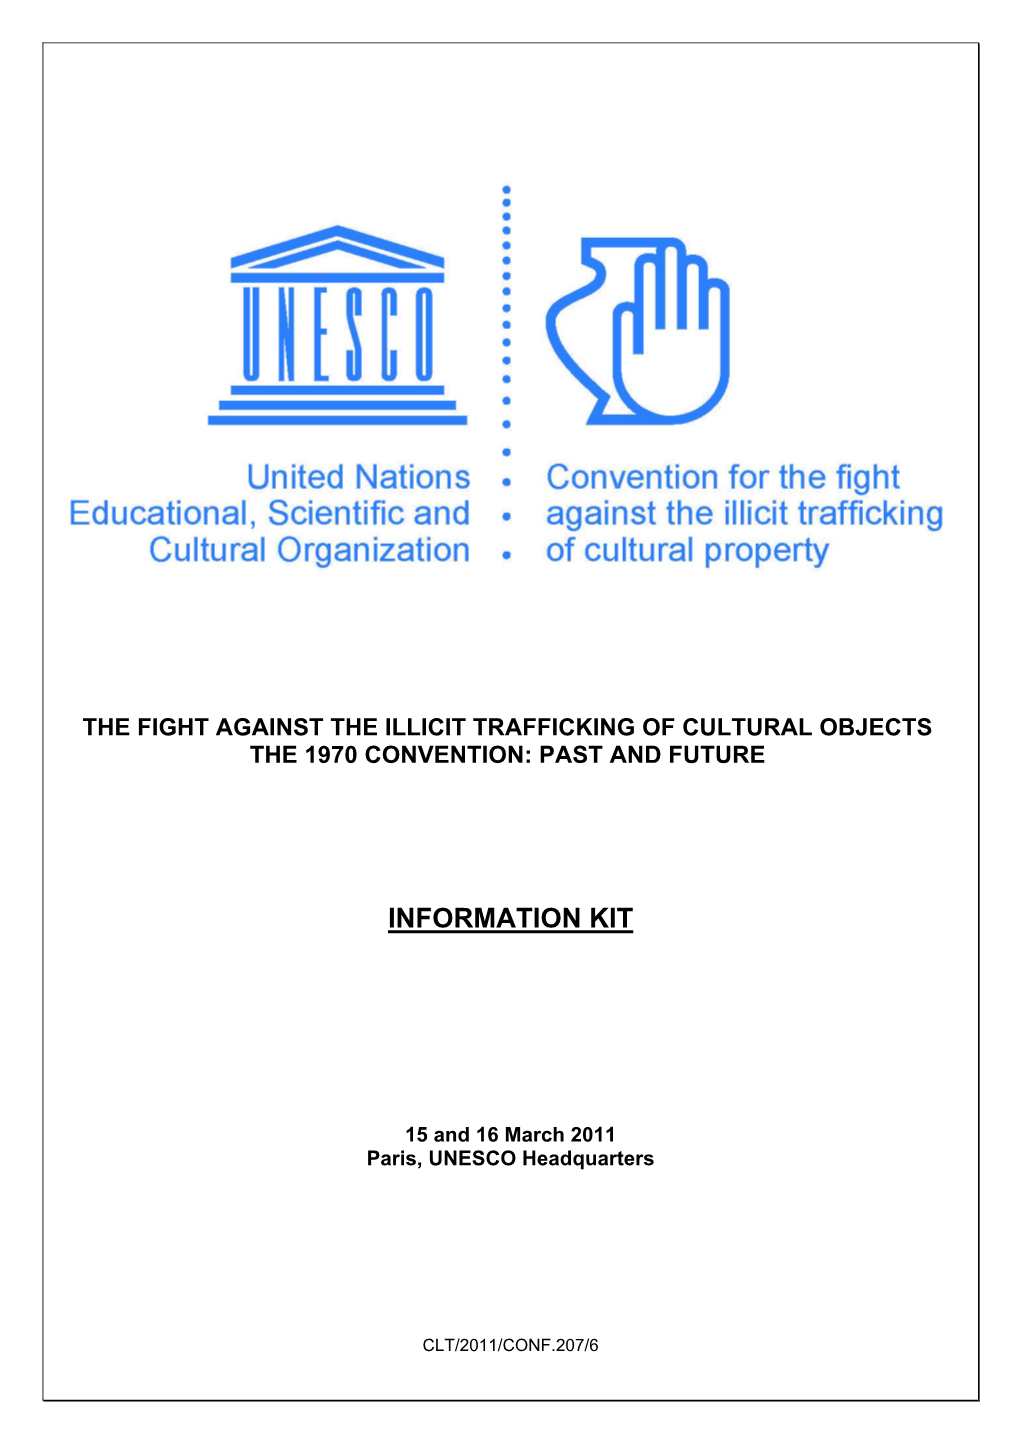 The Fight Against the Illicit Trafficking of Cultural Objects: the 1970